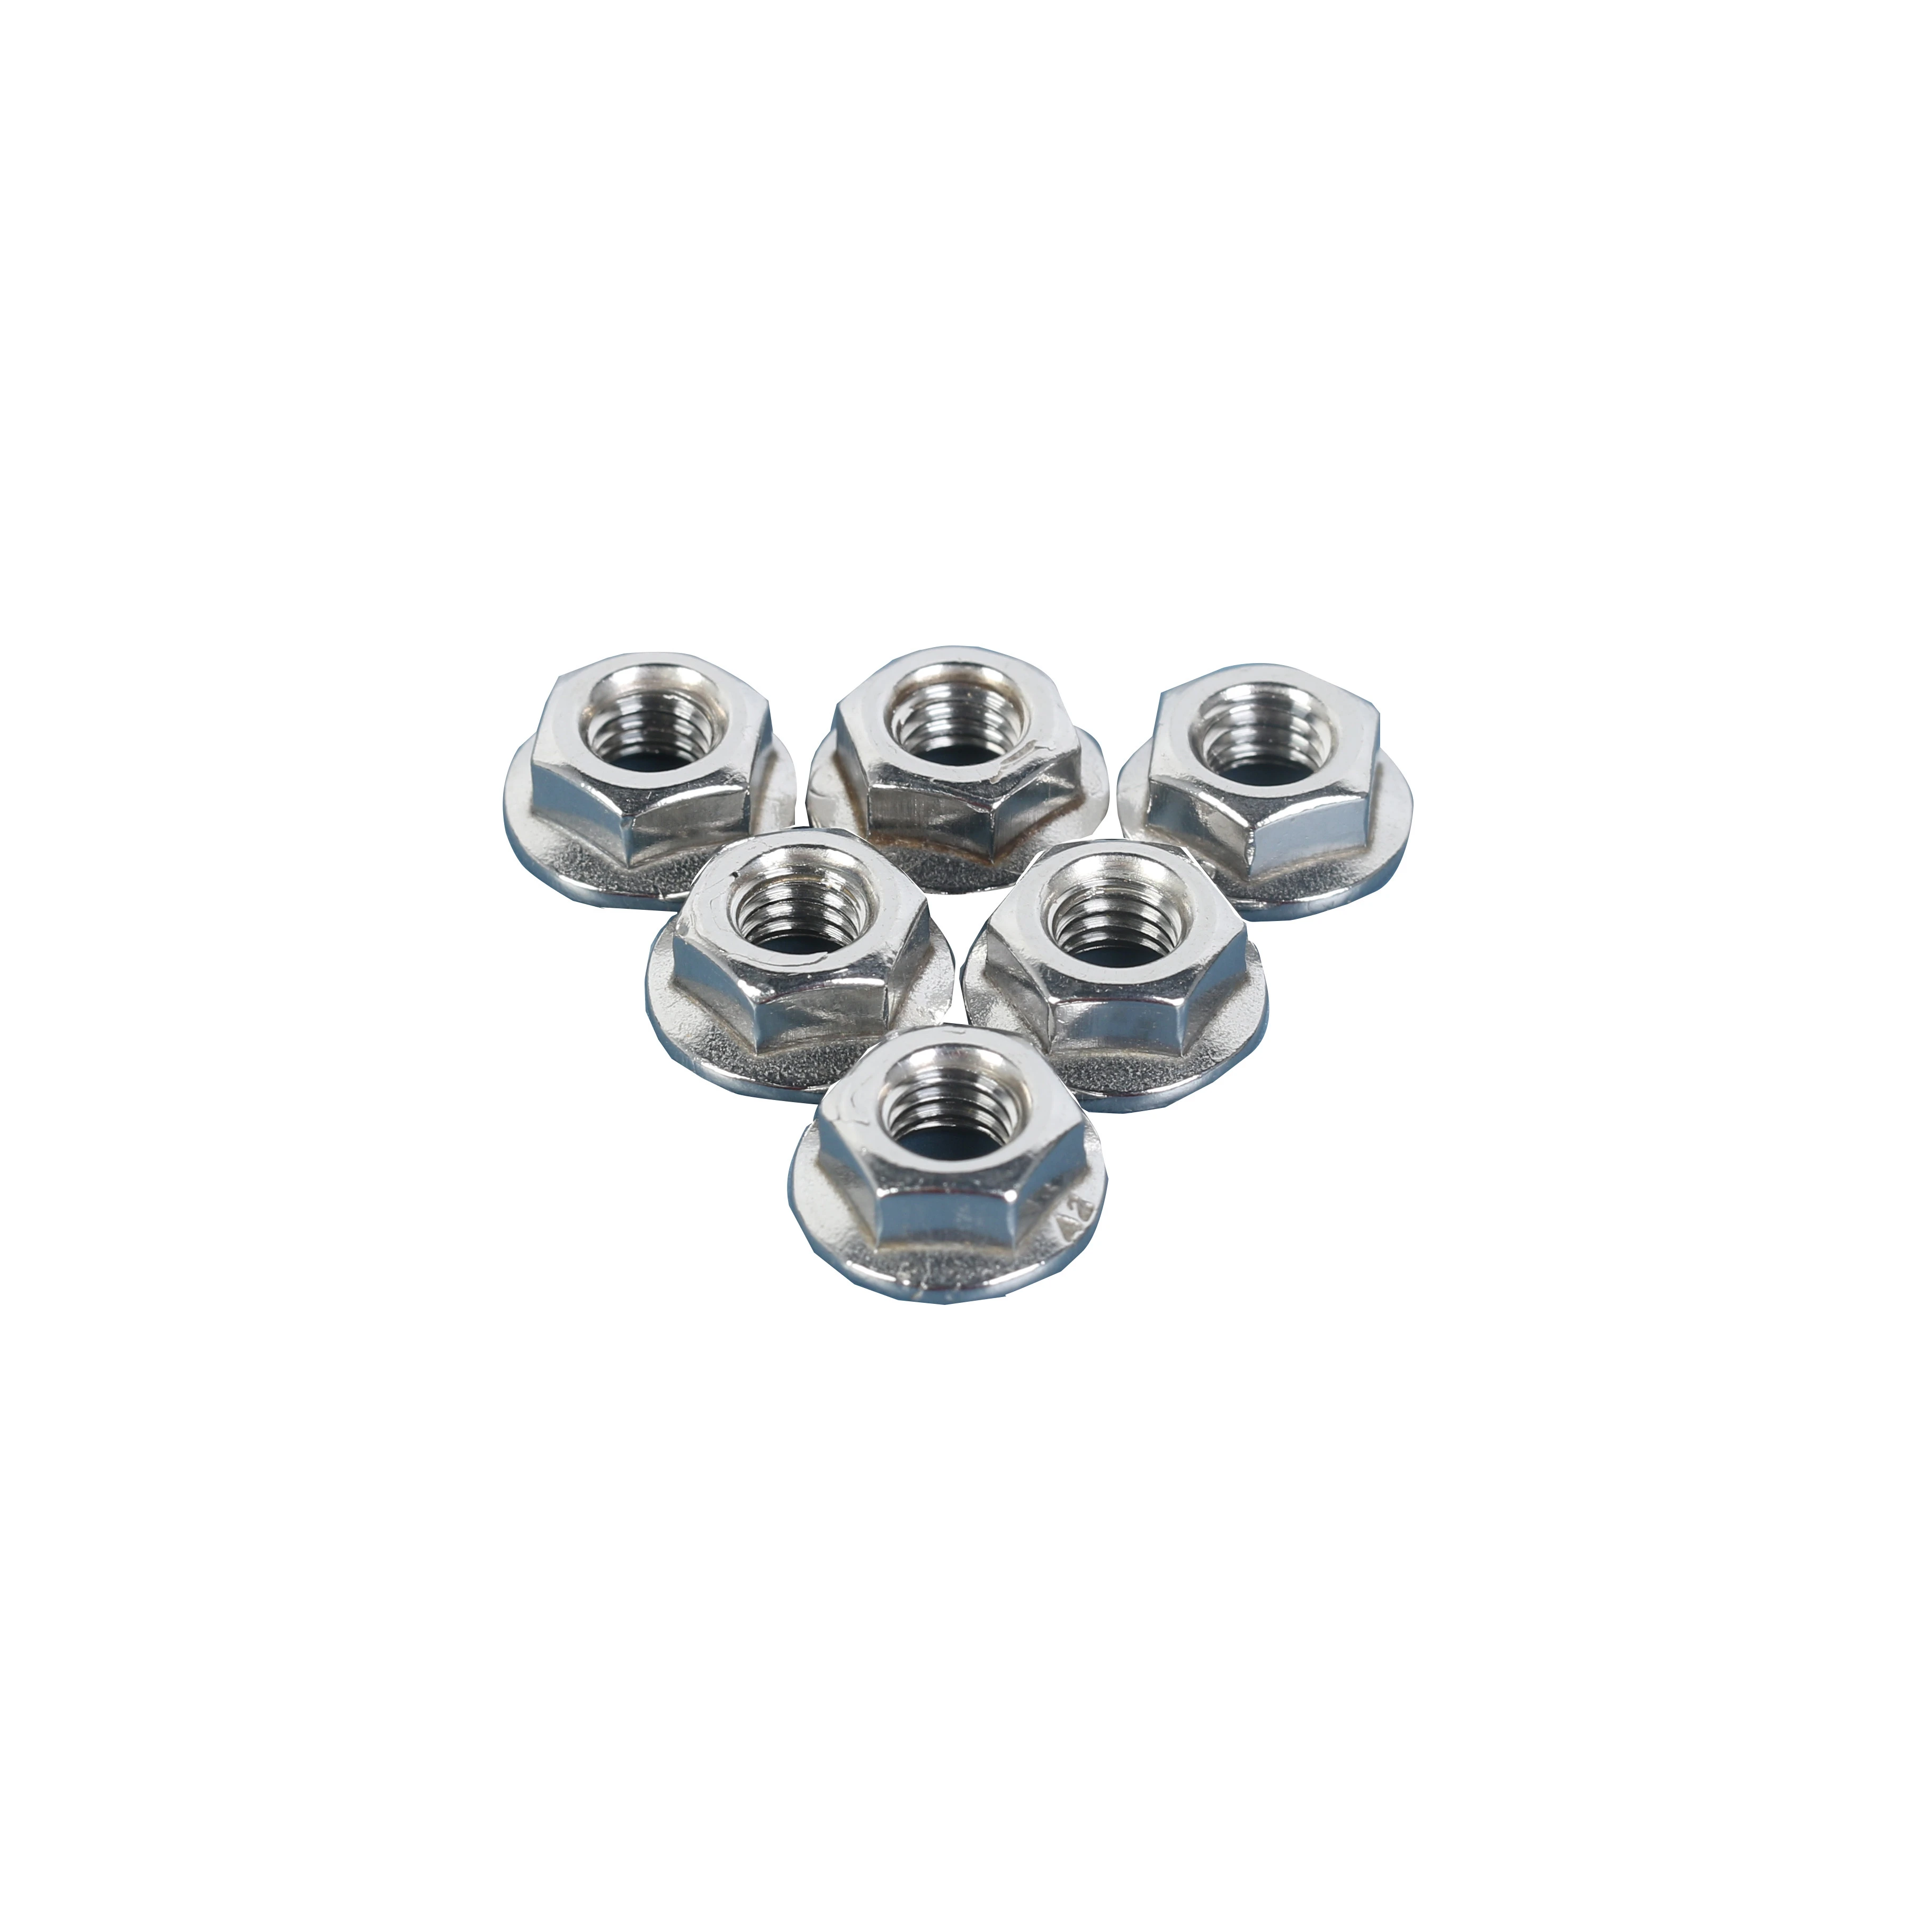 Flange Nuts Customized Stainless Steel 304 Hex Flange Nuts